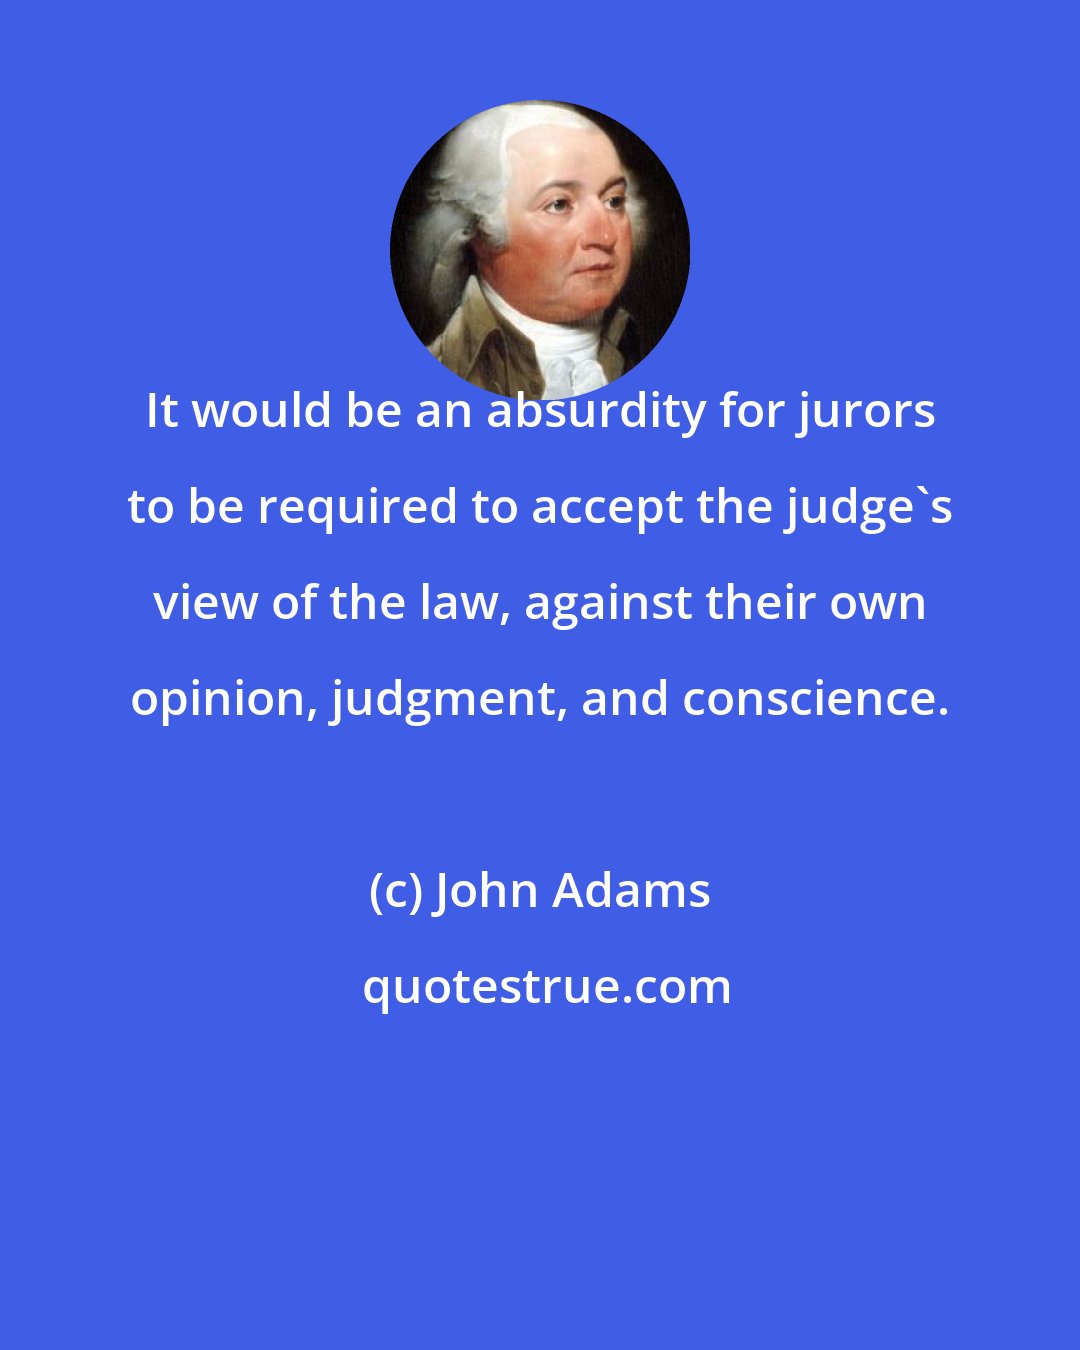 John Adams: It would be an absurdity for jurors to be required to accept the judge's view of the law, against their own opinion, judgment, and conscience.